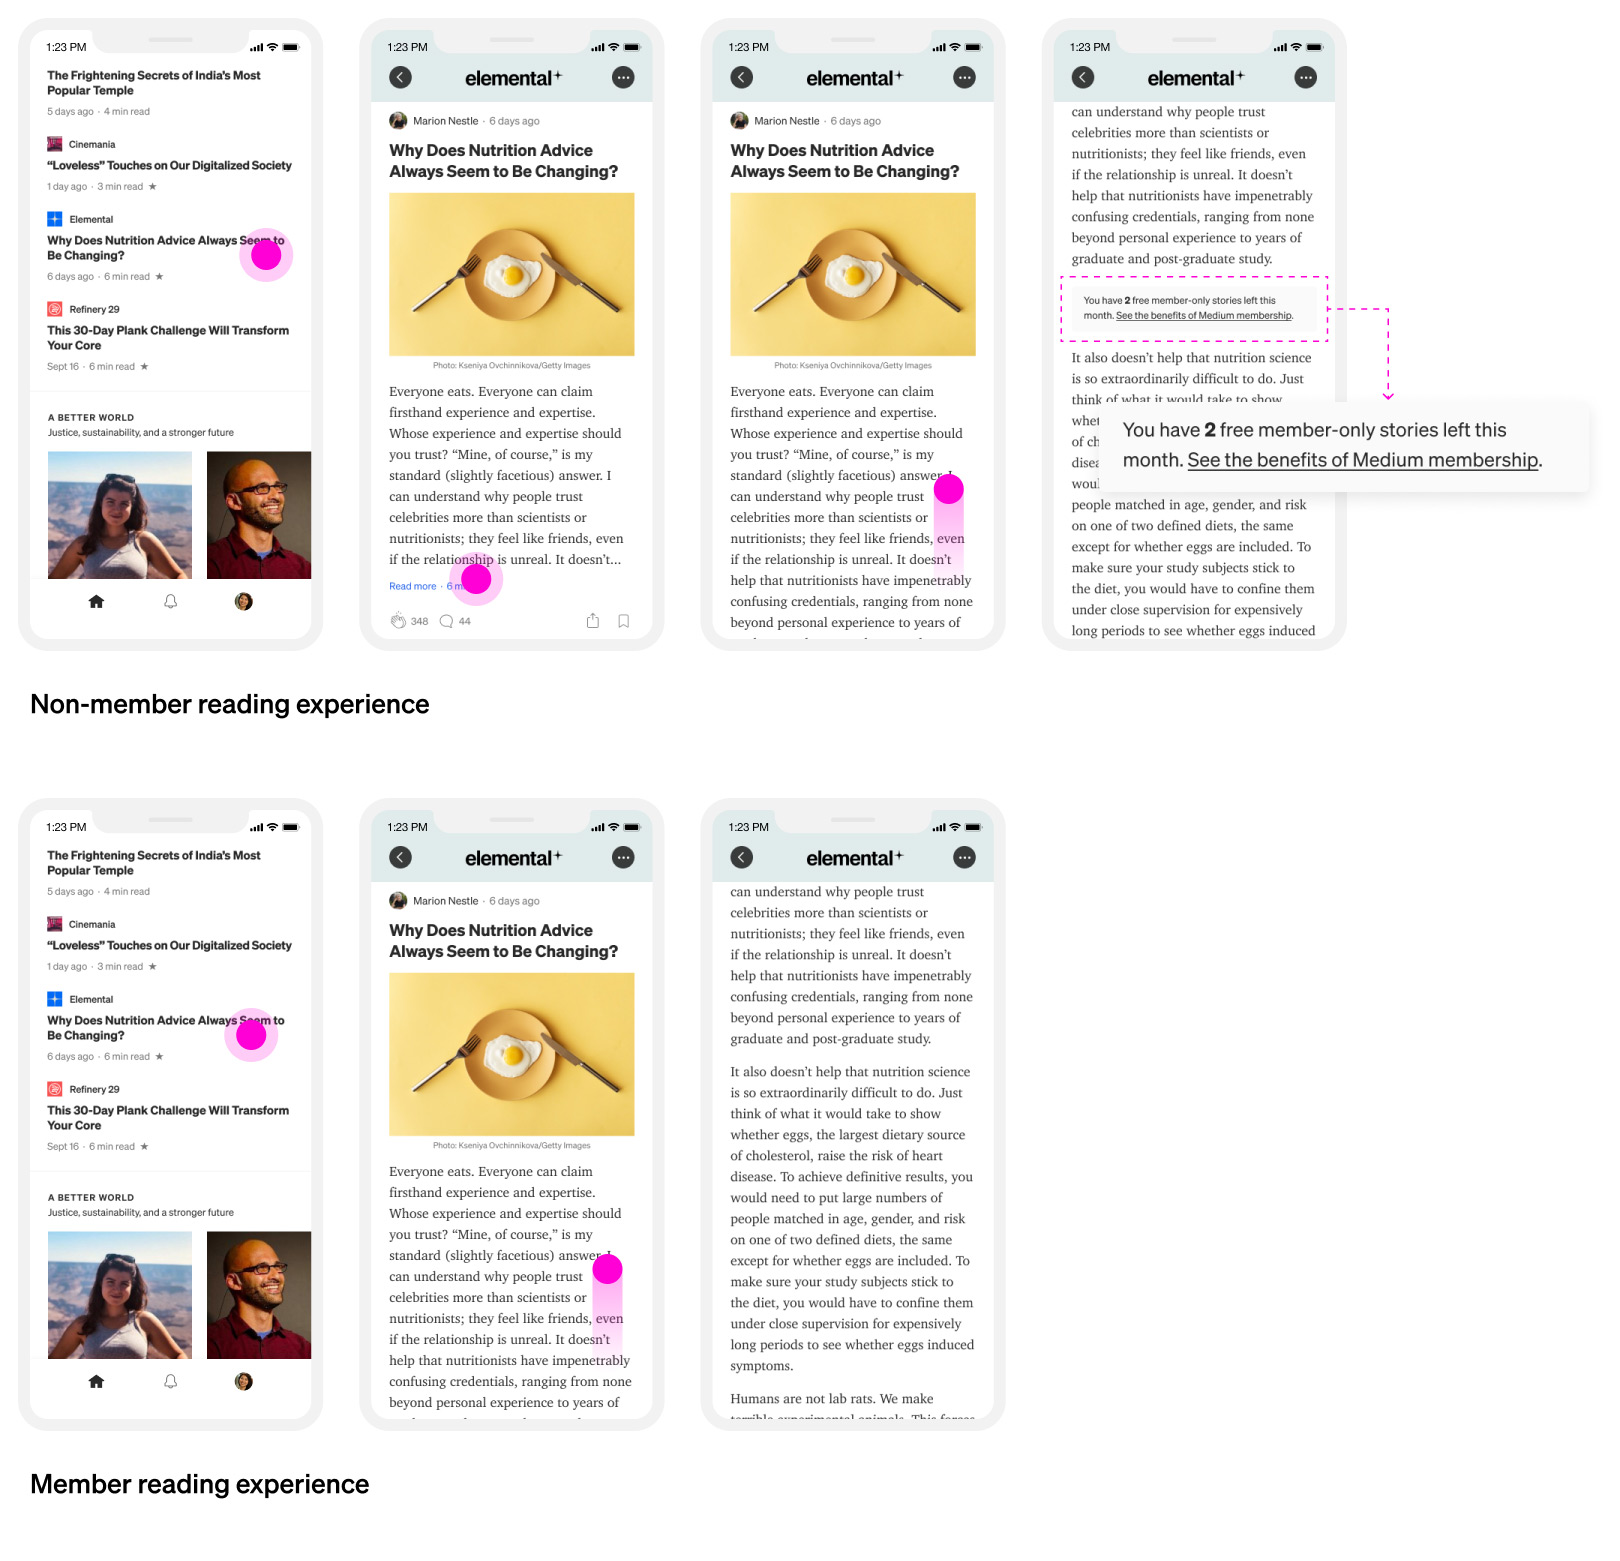 When non-members select a story to read, they have to tap twice to load a paywalled story in full, whereas members would see the full story immediately. Non-members will also see the meter information as they read, which informs them on how many free paywalled stories they have left. In certain cases, some friction in the experience is a good thing.